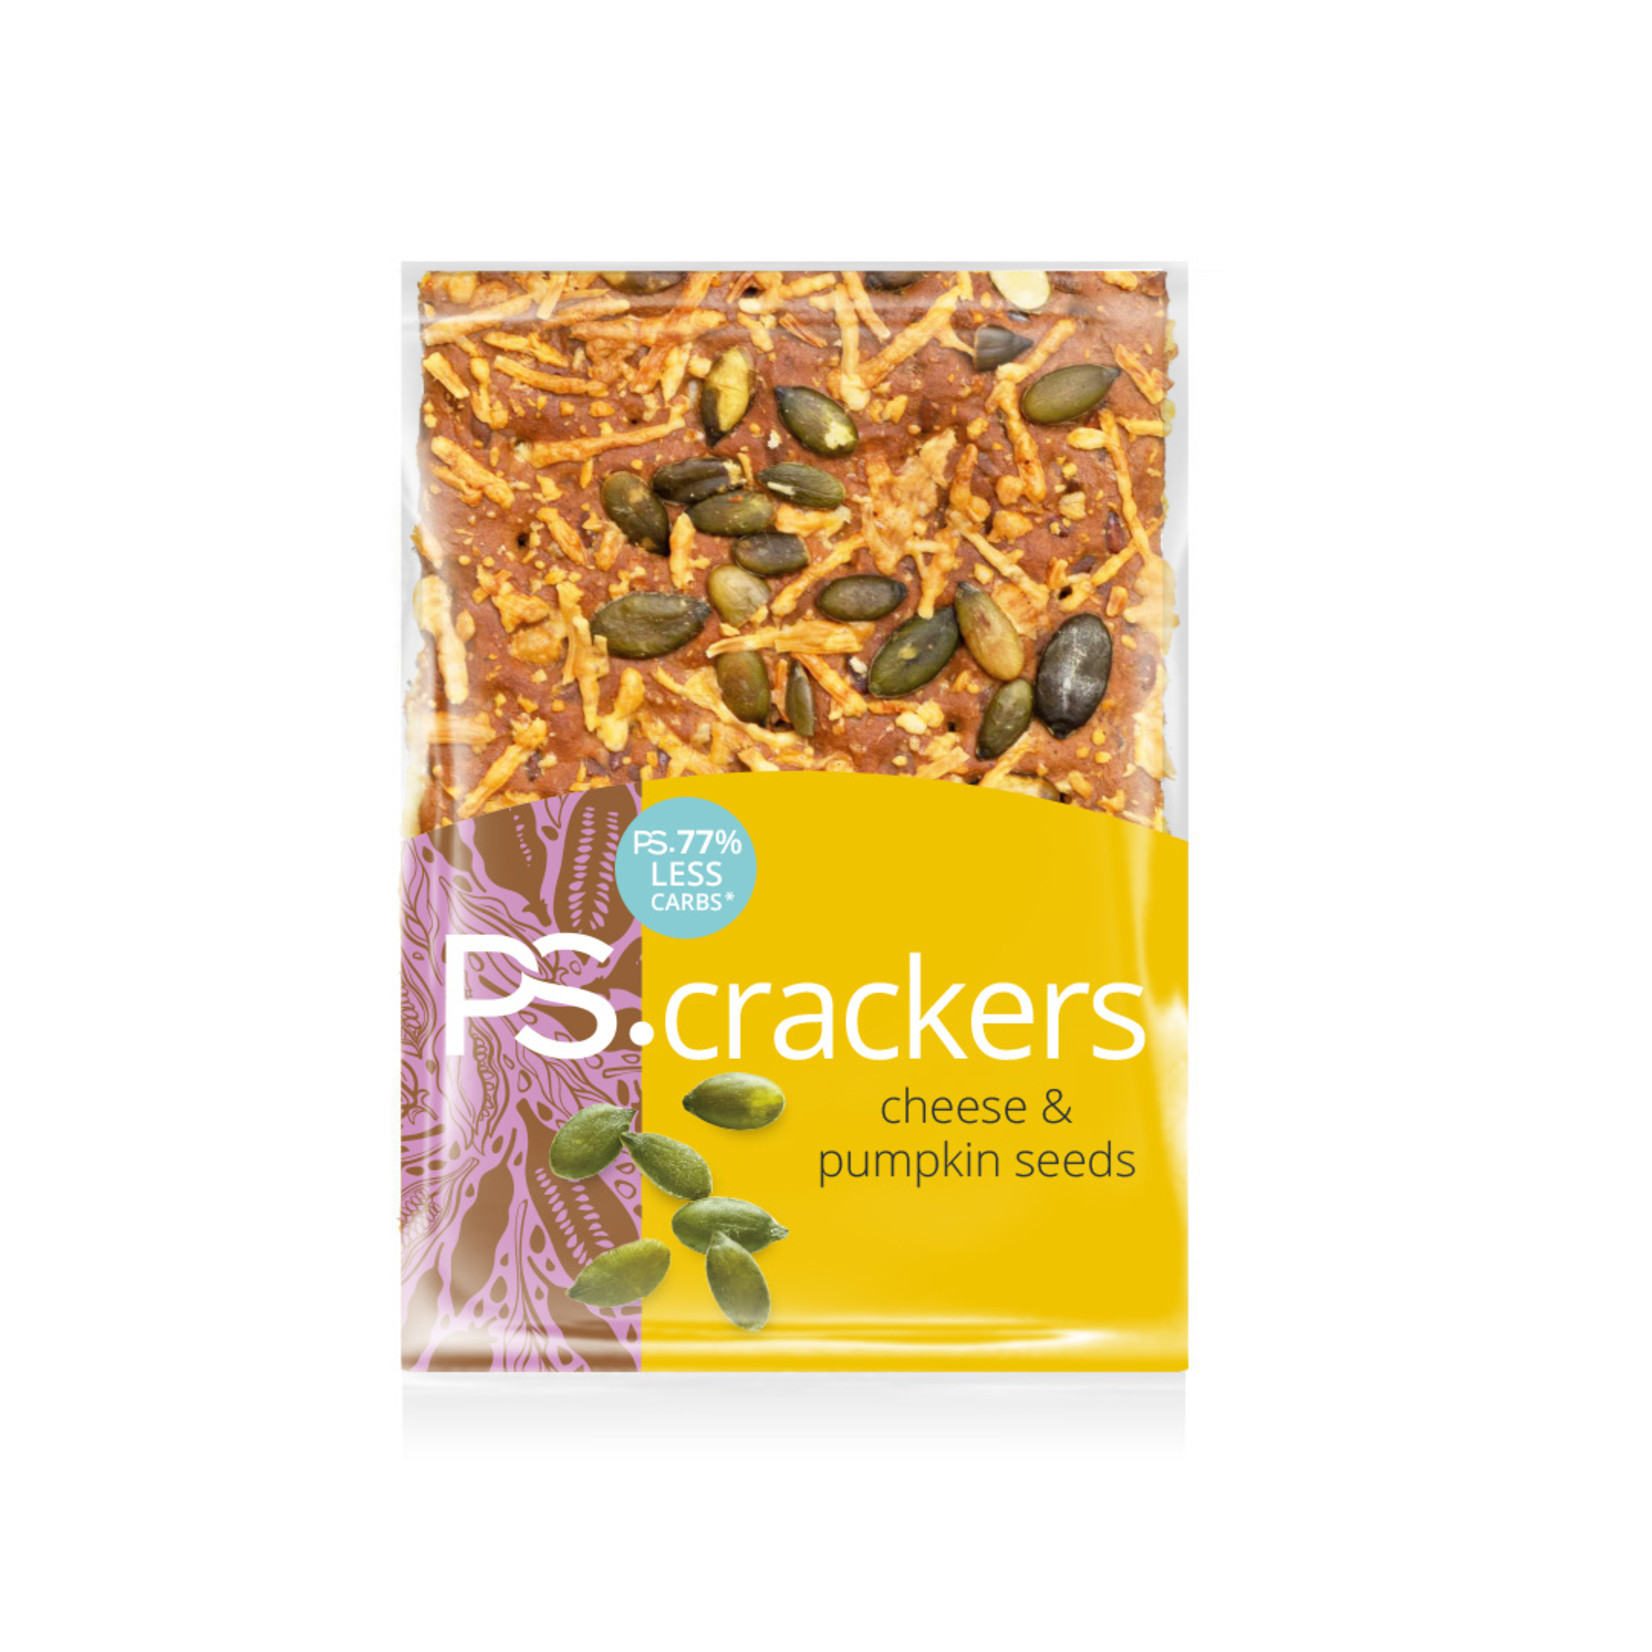 PS. crackers cheese and pumpkin seed